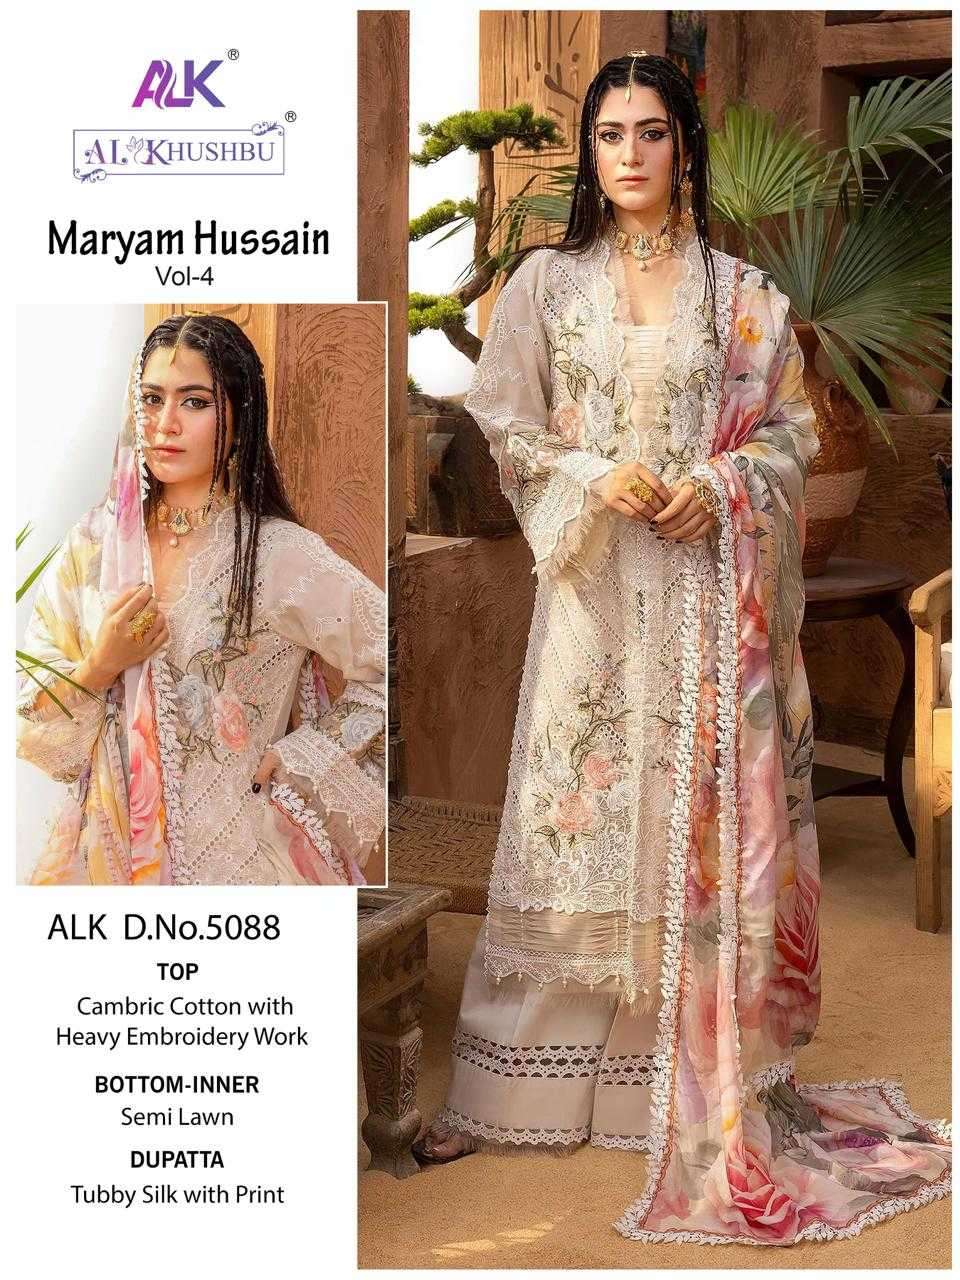 MARYAM HUSSAIN VOL-4 SERIES 5087 TO 5089 BY AL KHUSHBU DESIGNER WITH WORK PAKISTANI STYLES CAMBRIC COTTON SUITS ARE AVAILABLE AT WHOLESALE PRICE